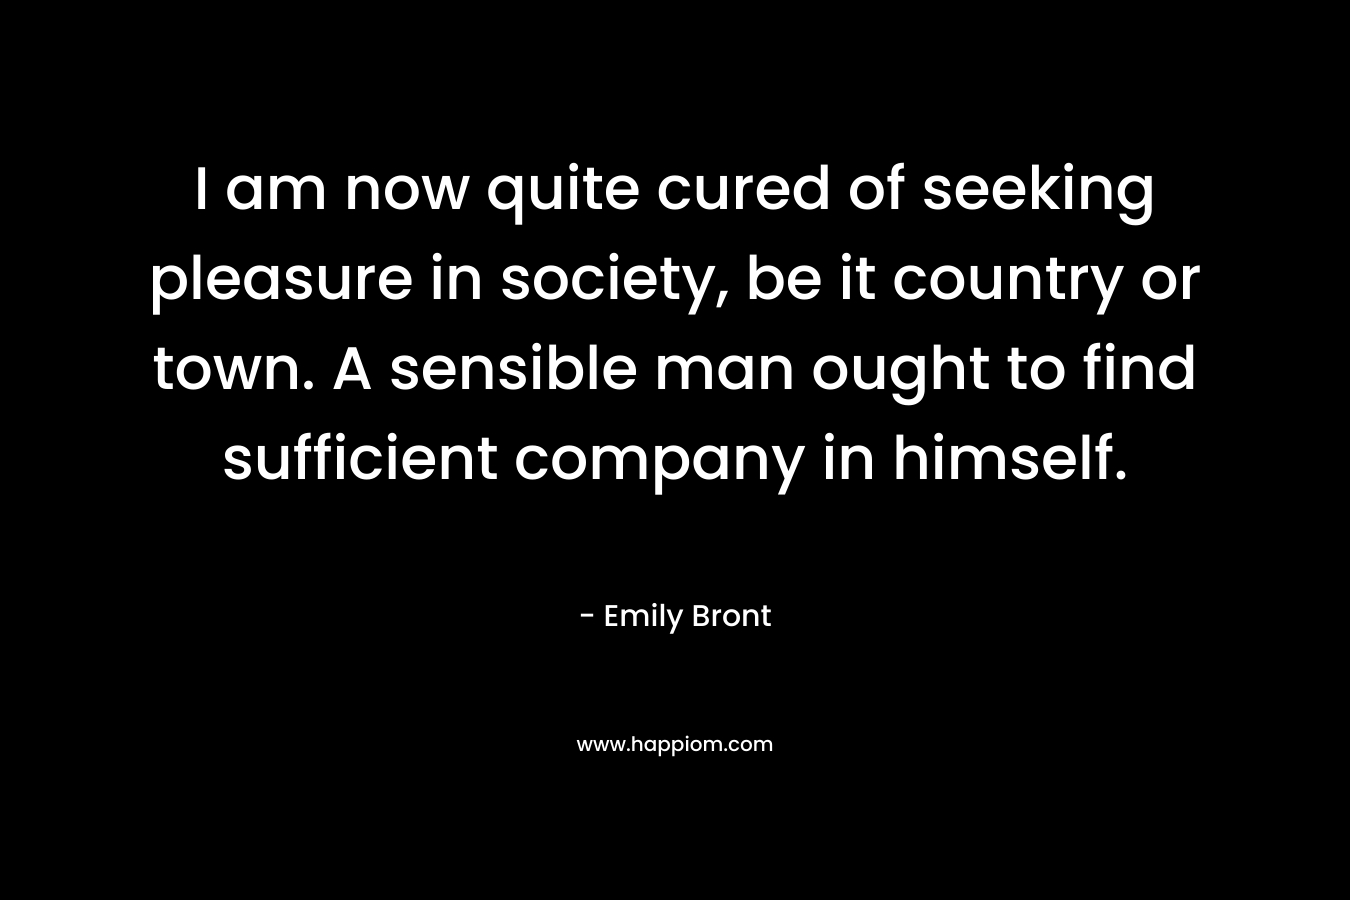 I am now quite cured of seeking pleasure in society, be it country or town. A sensible man ought to find sufficient company in himself. – Emily Bront